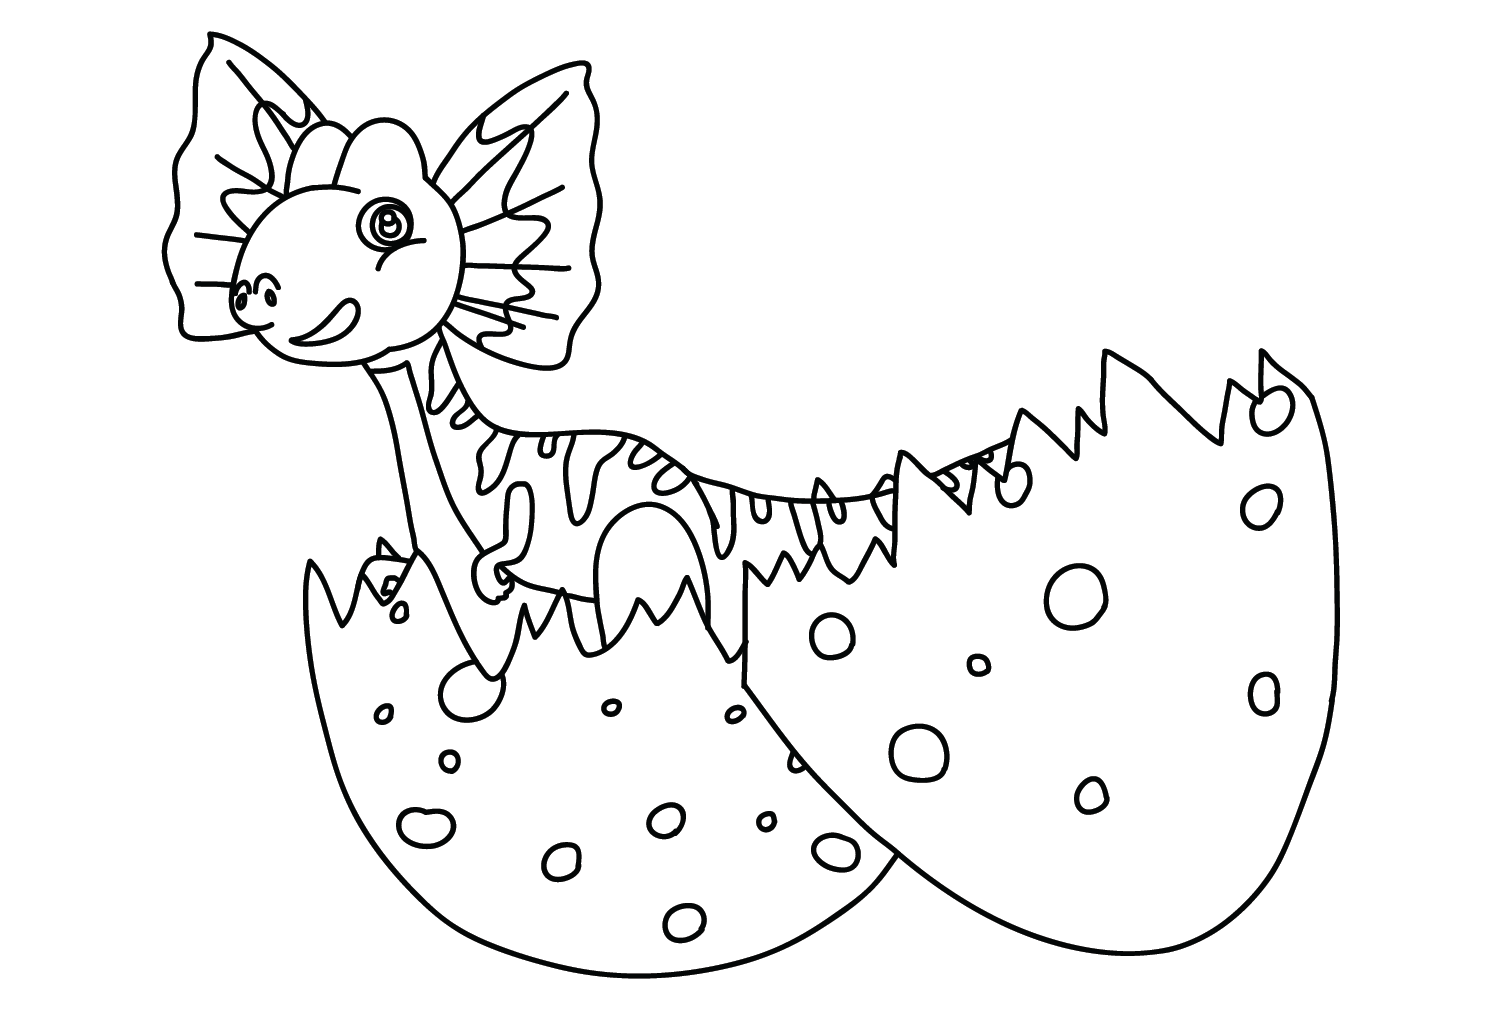 Baby Dilophosaurus Coloring Page from Dilophosaurus